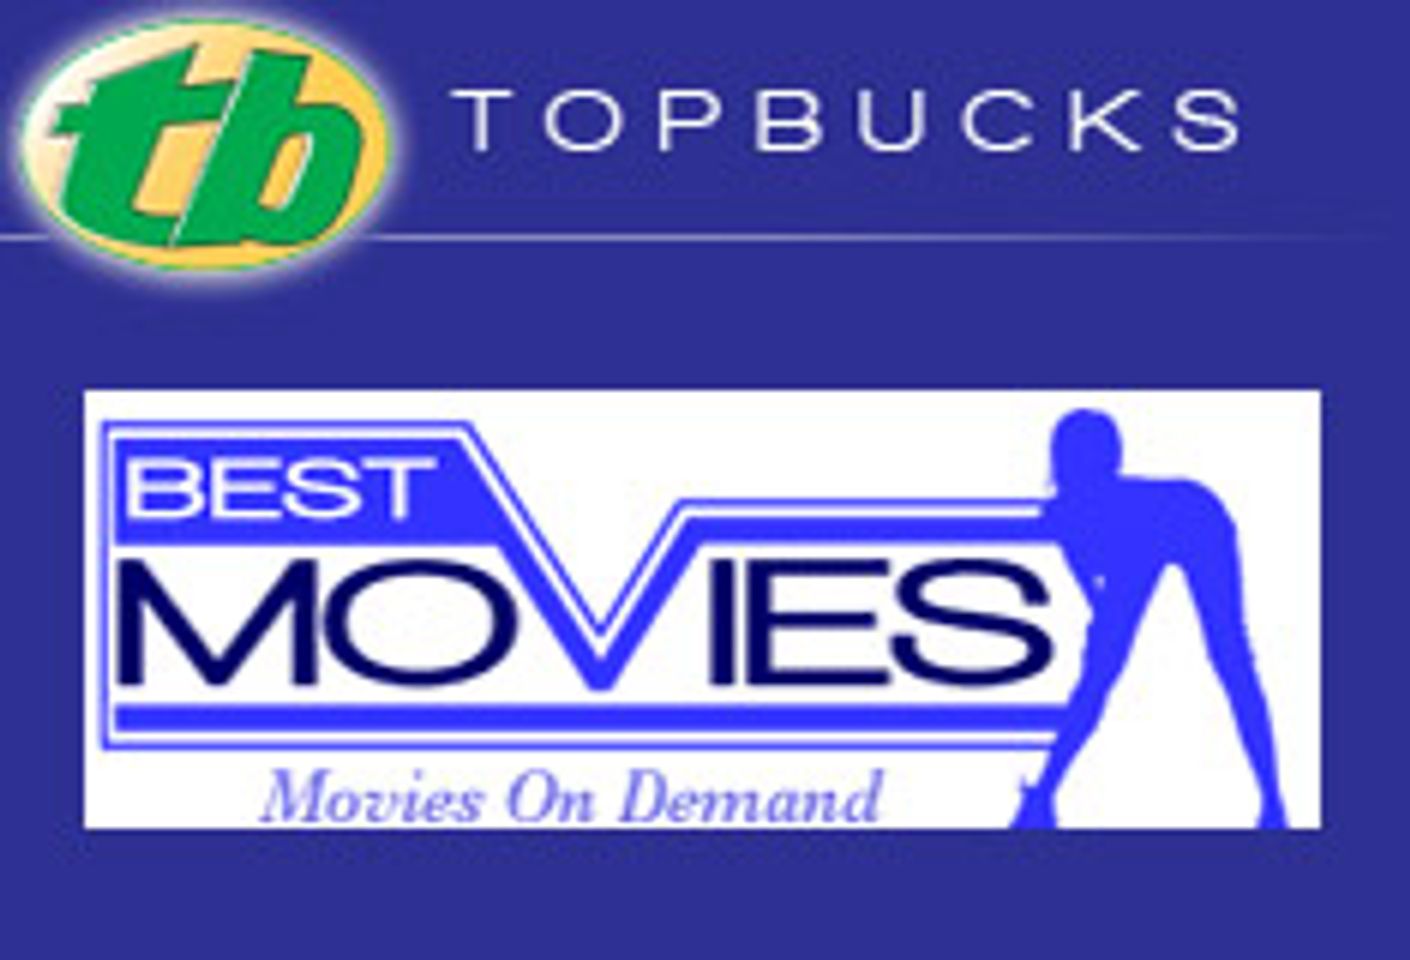 TopBucks Signs More Leading Video Producers for BestMovies.com